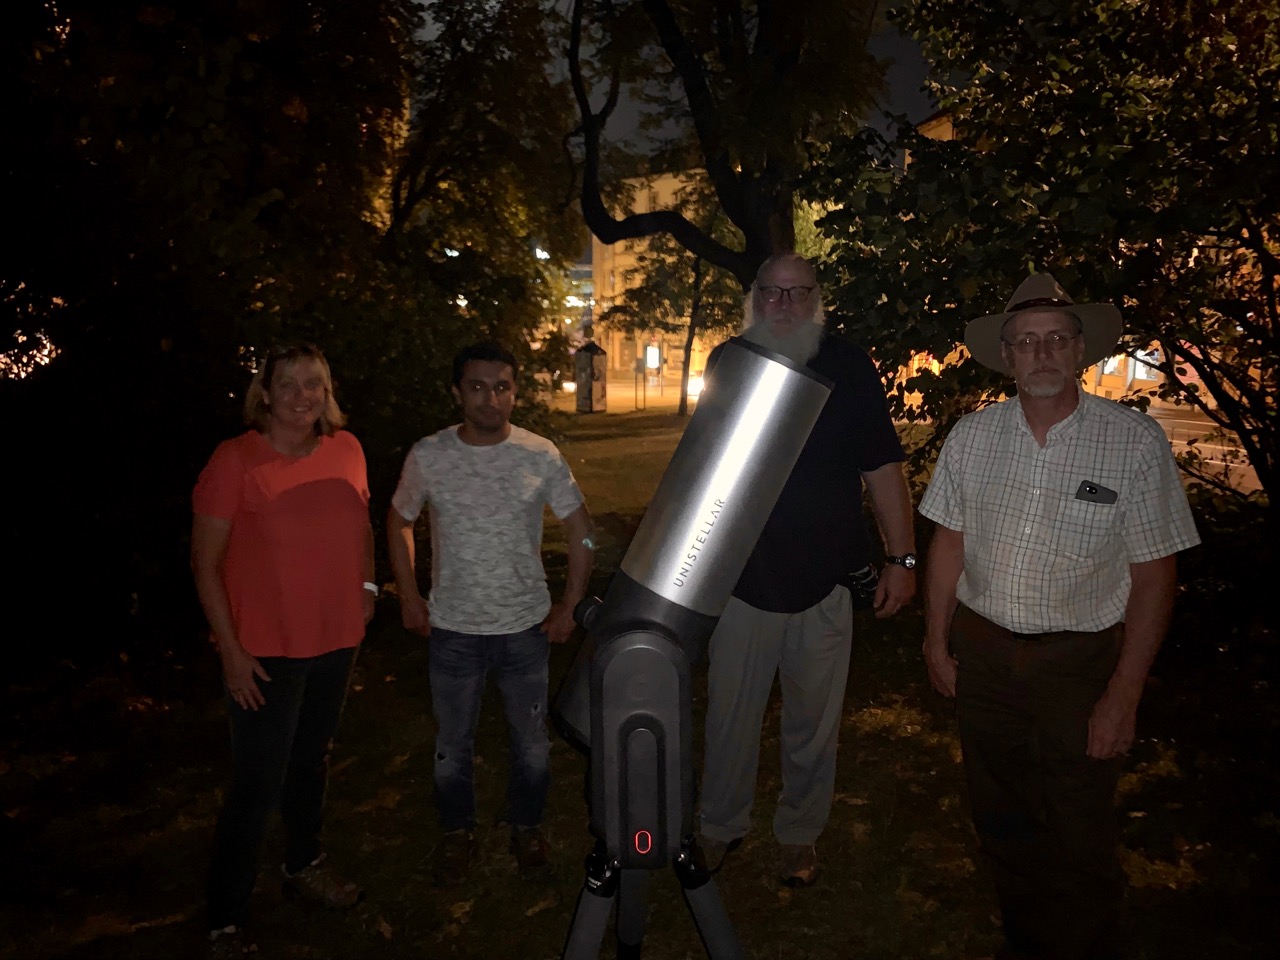 Demonstration of the eVscope at night in Geneva